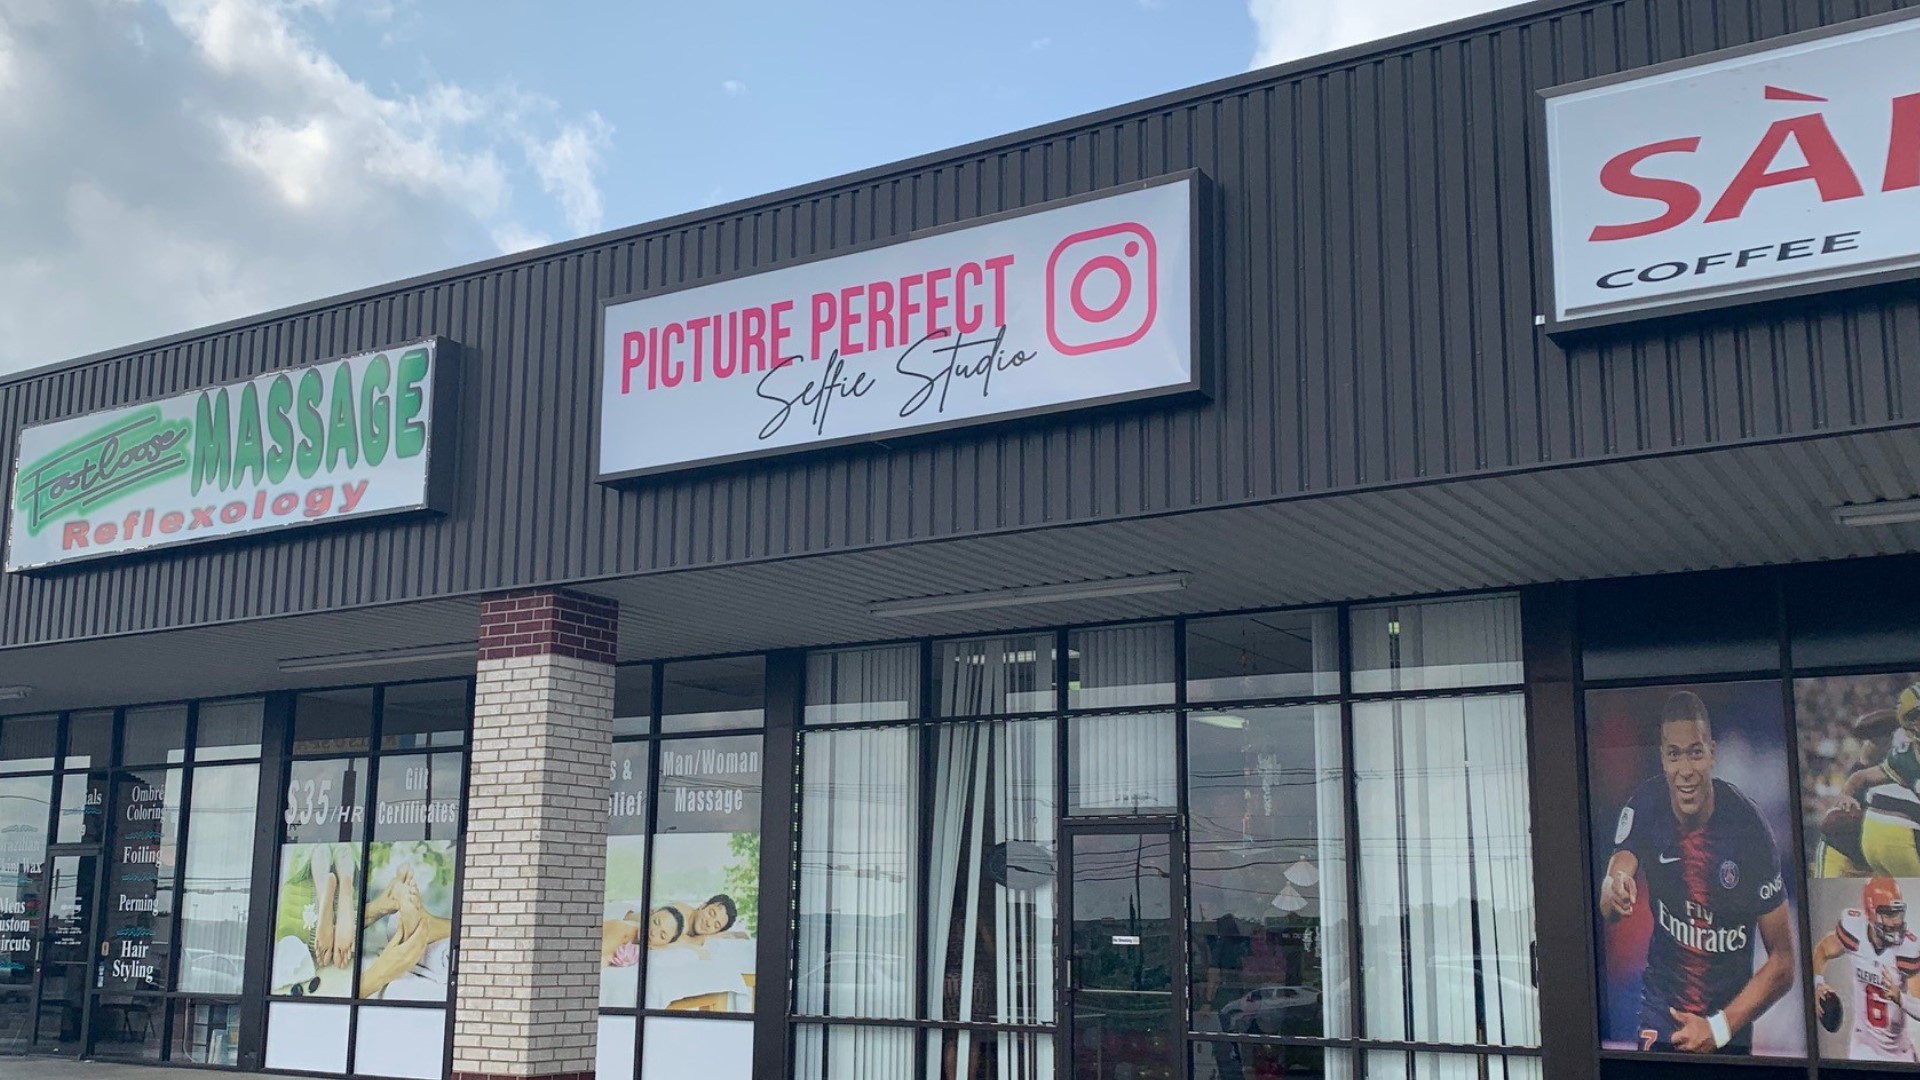 Picture Perfect Selfie Studio will open officially on August 14th.